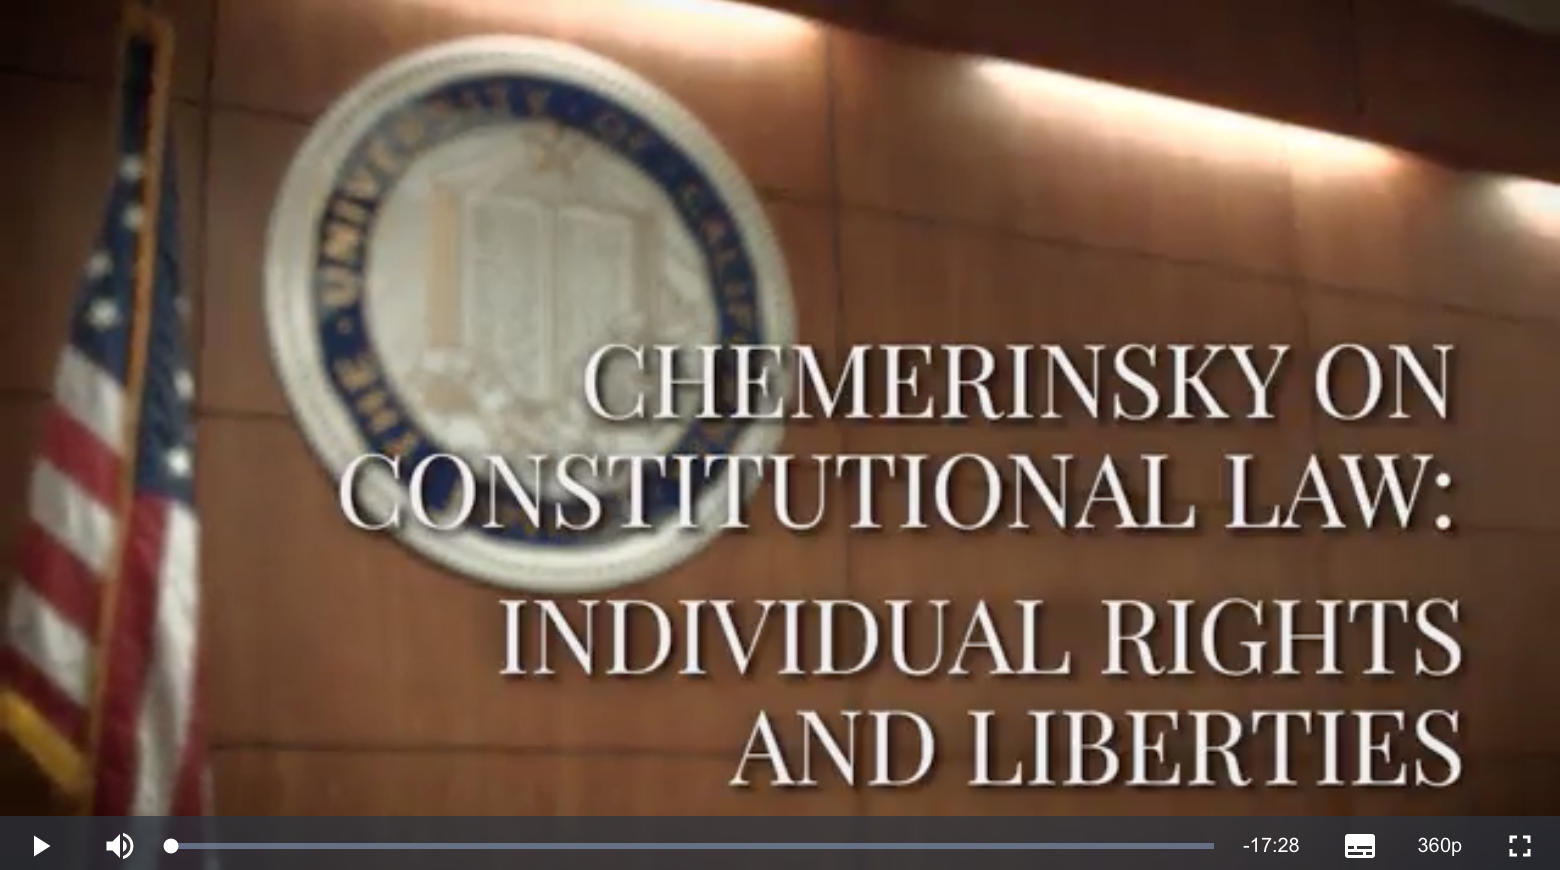 Chemerinsky on Constitutional Law: Individual Rights and Liberties